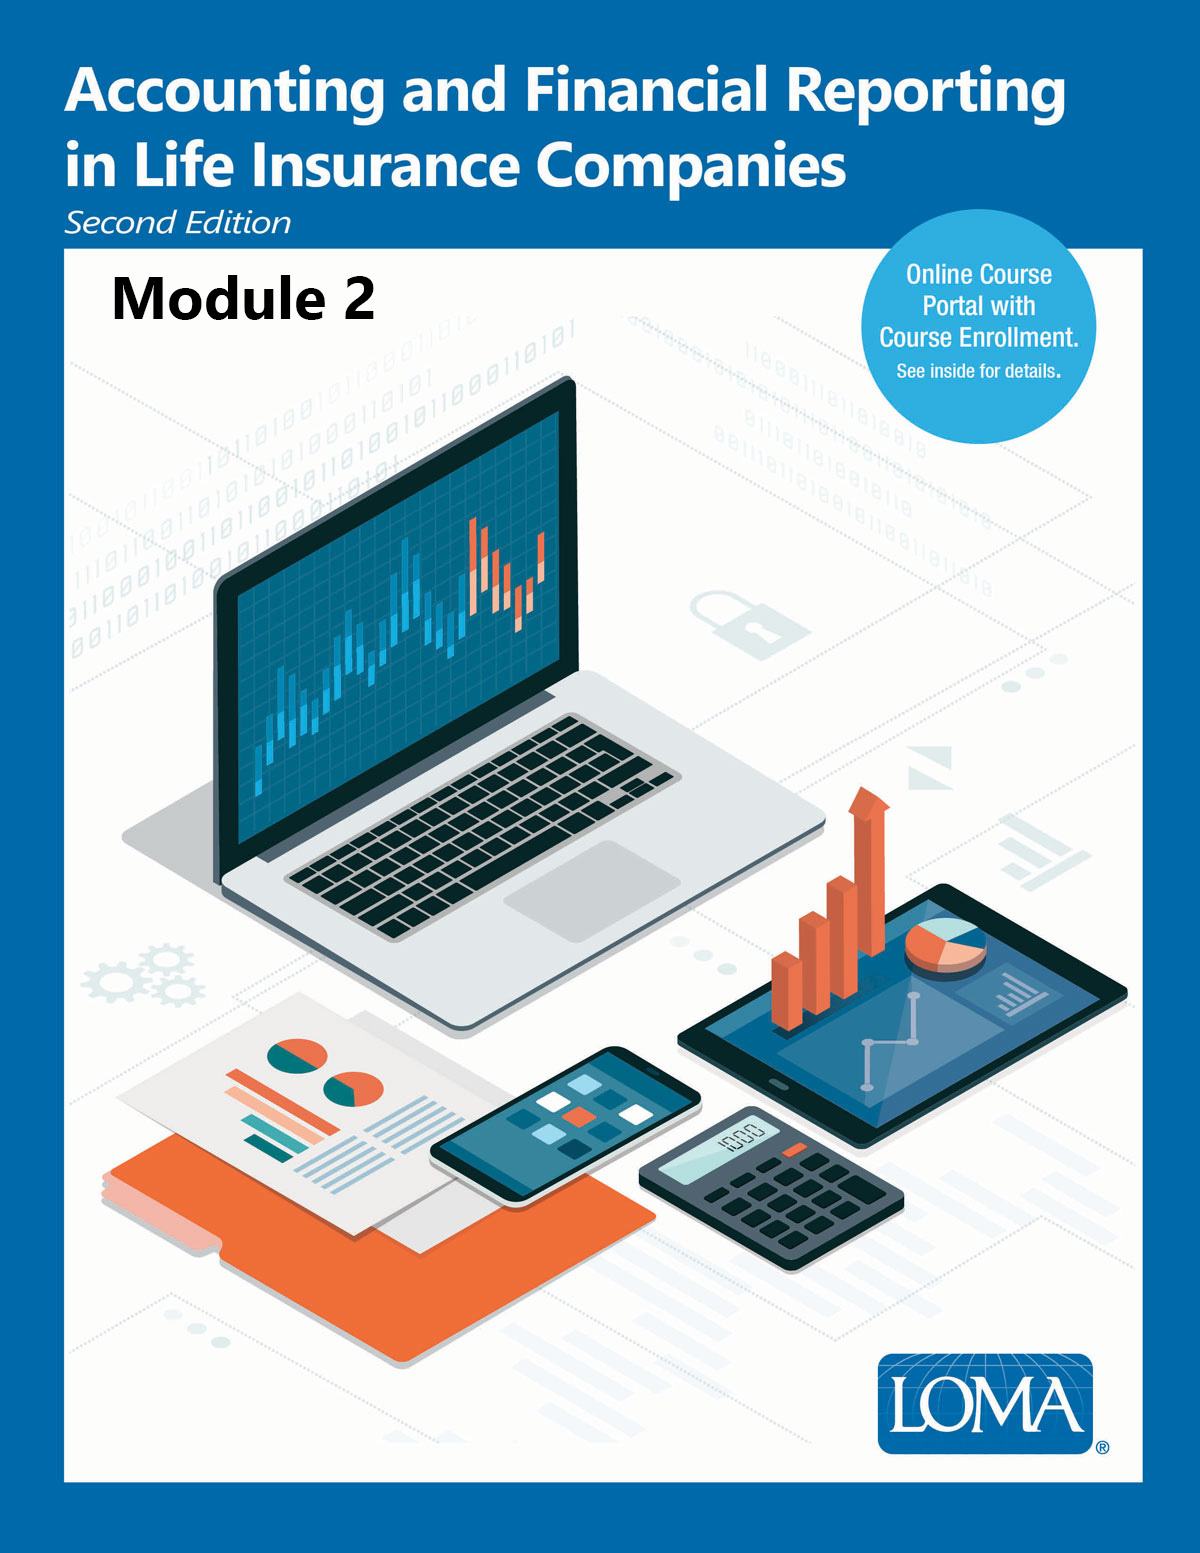 Accounting and Financial Reporting in Life Insurance Companies: 2nd Edition - Module 2